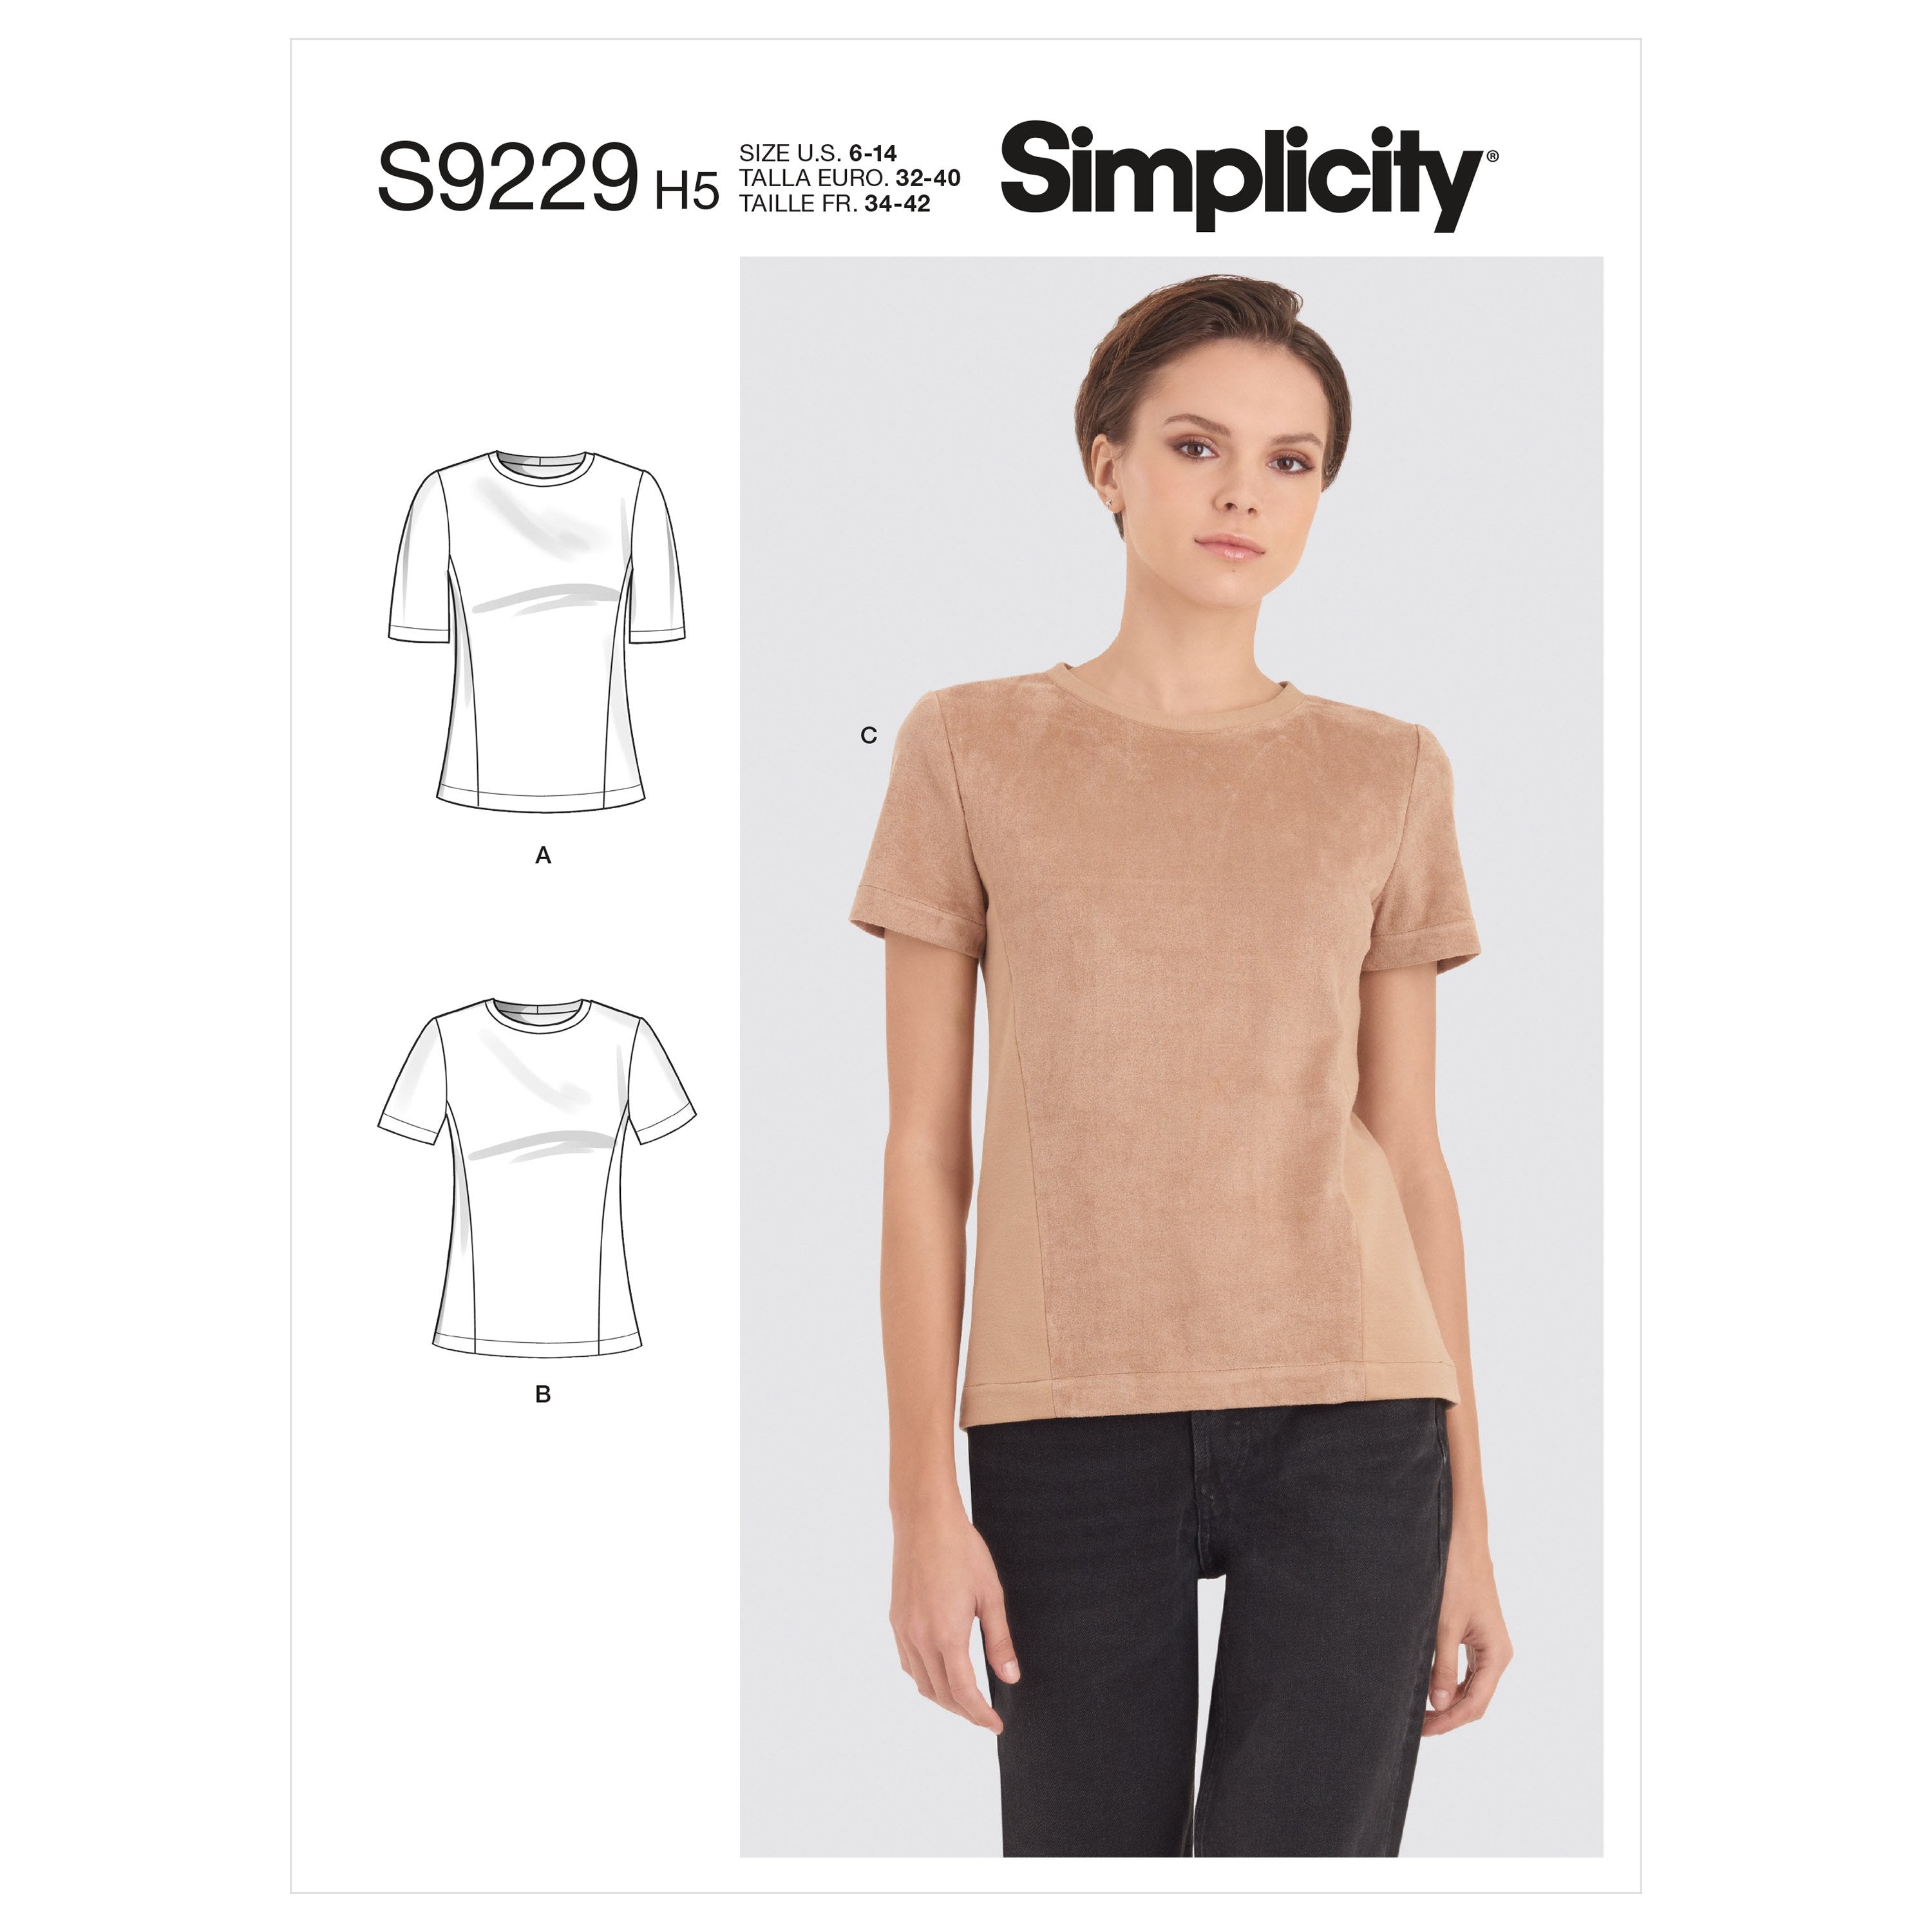 Simplicity Sewing Pattern 9229 Knit Tee Shirt from Jaycotts Sewing Supplies